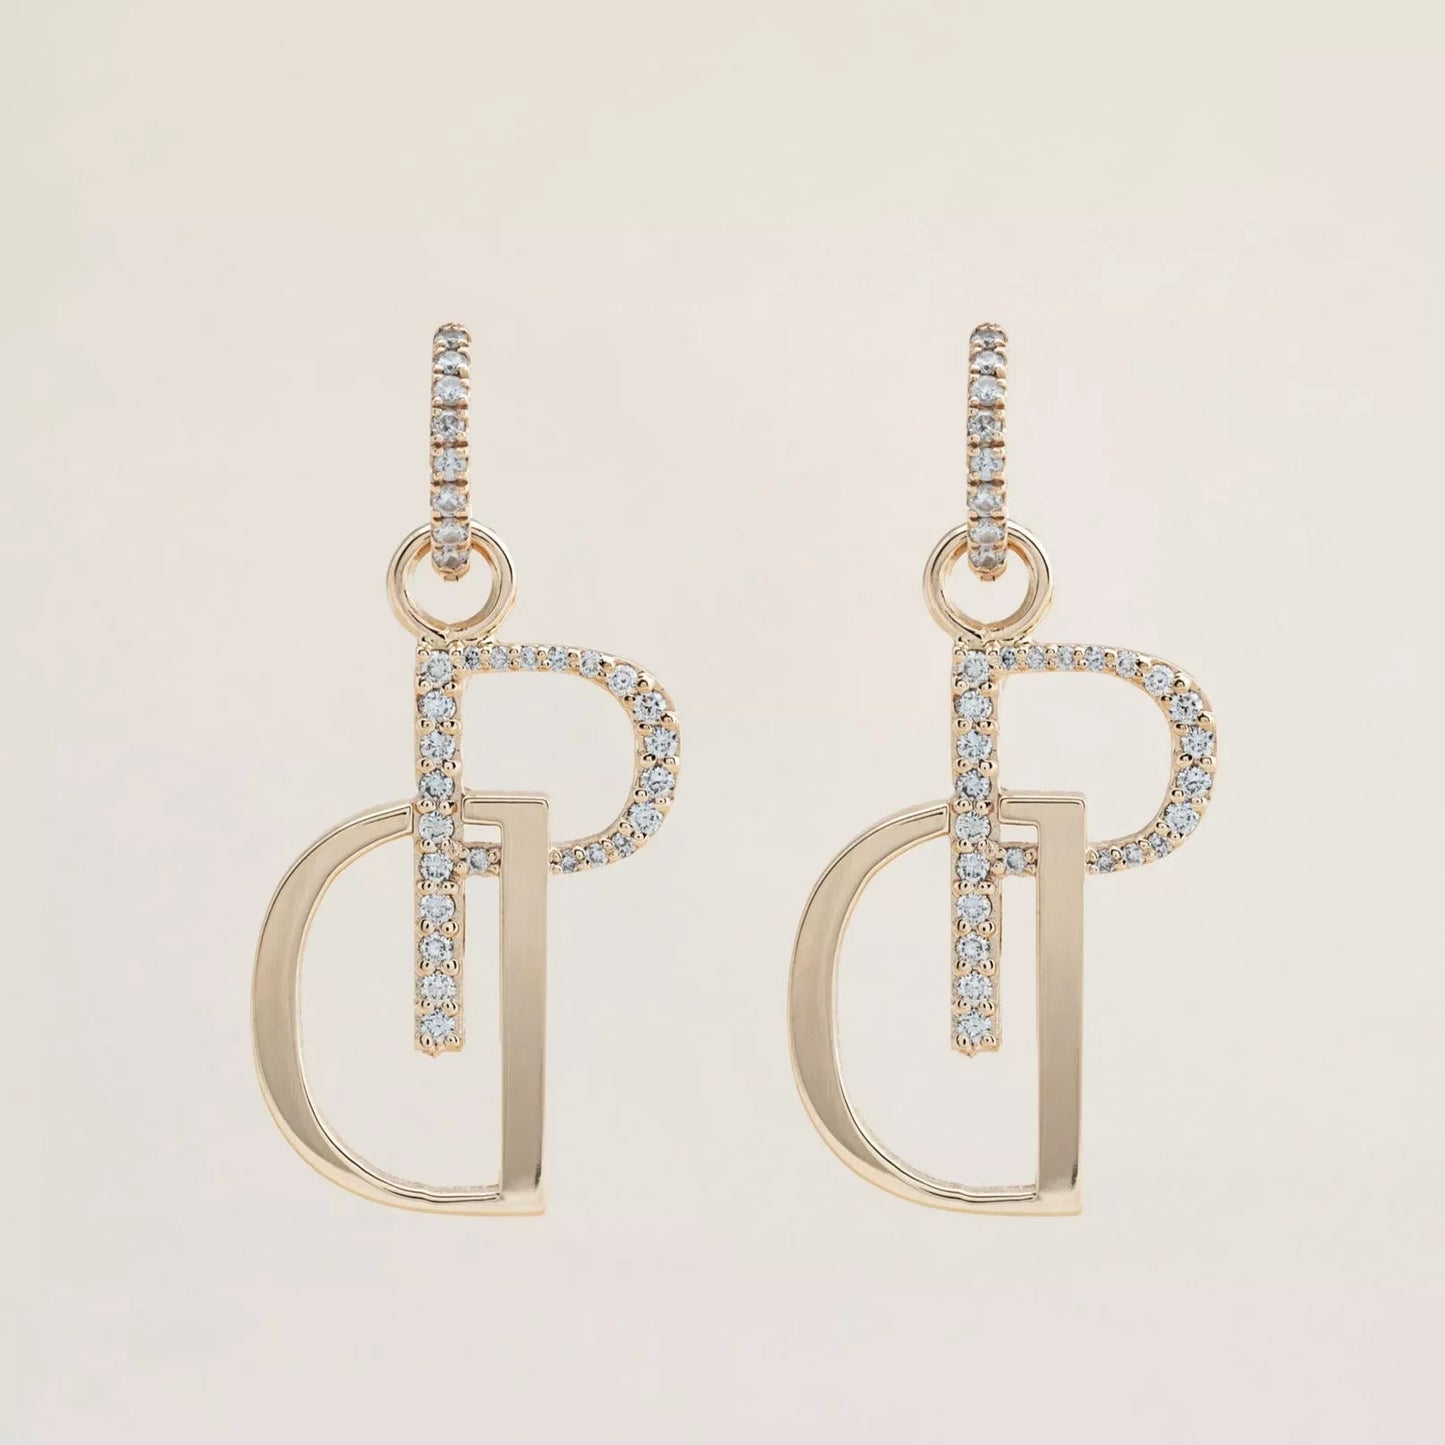 Signature Charms on Pavé Large Hoops